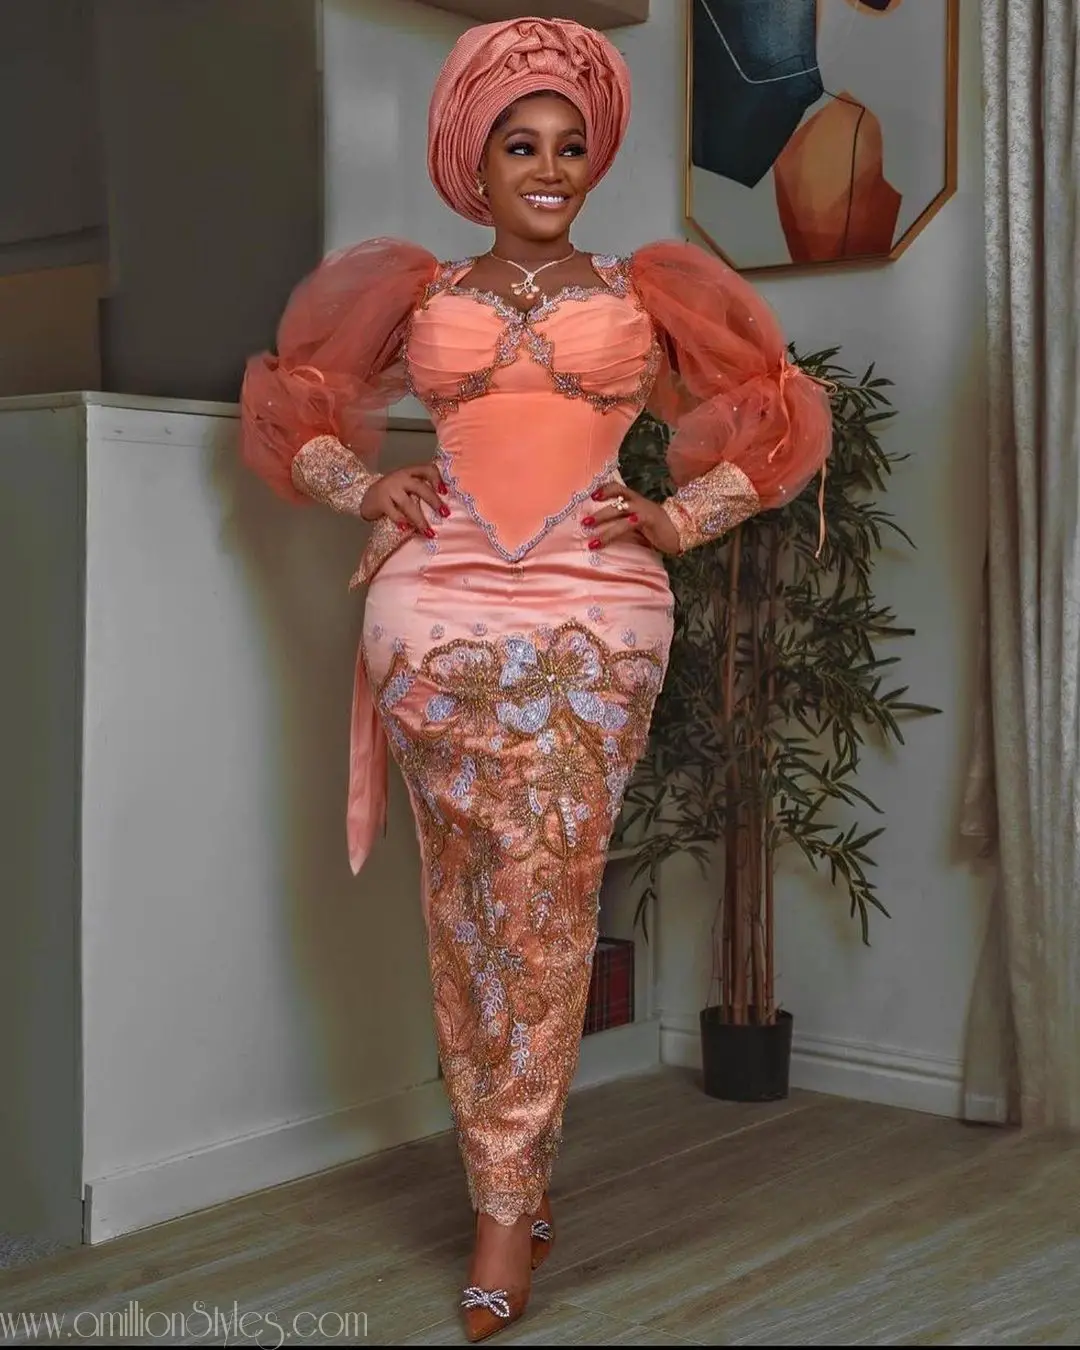 Thought Corset Lace Asoebi Styles Were Out Of The Game? Think Again!